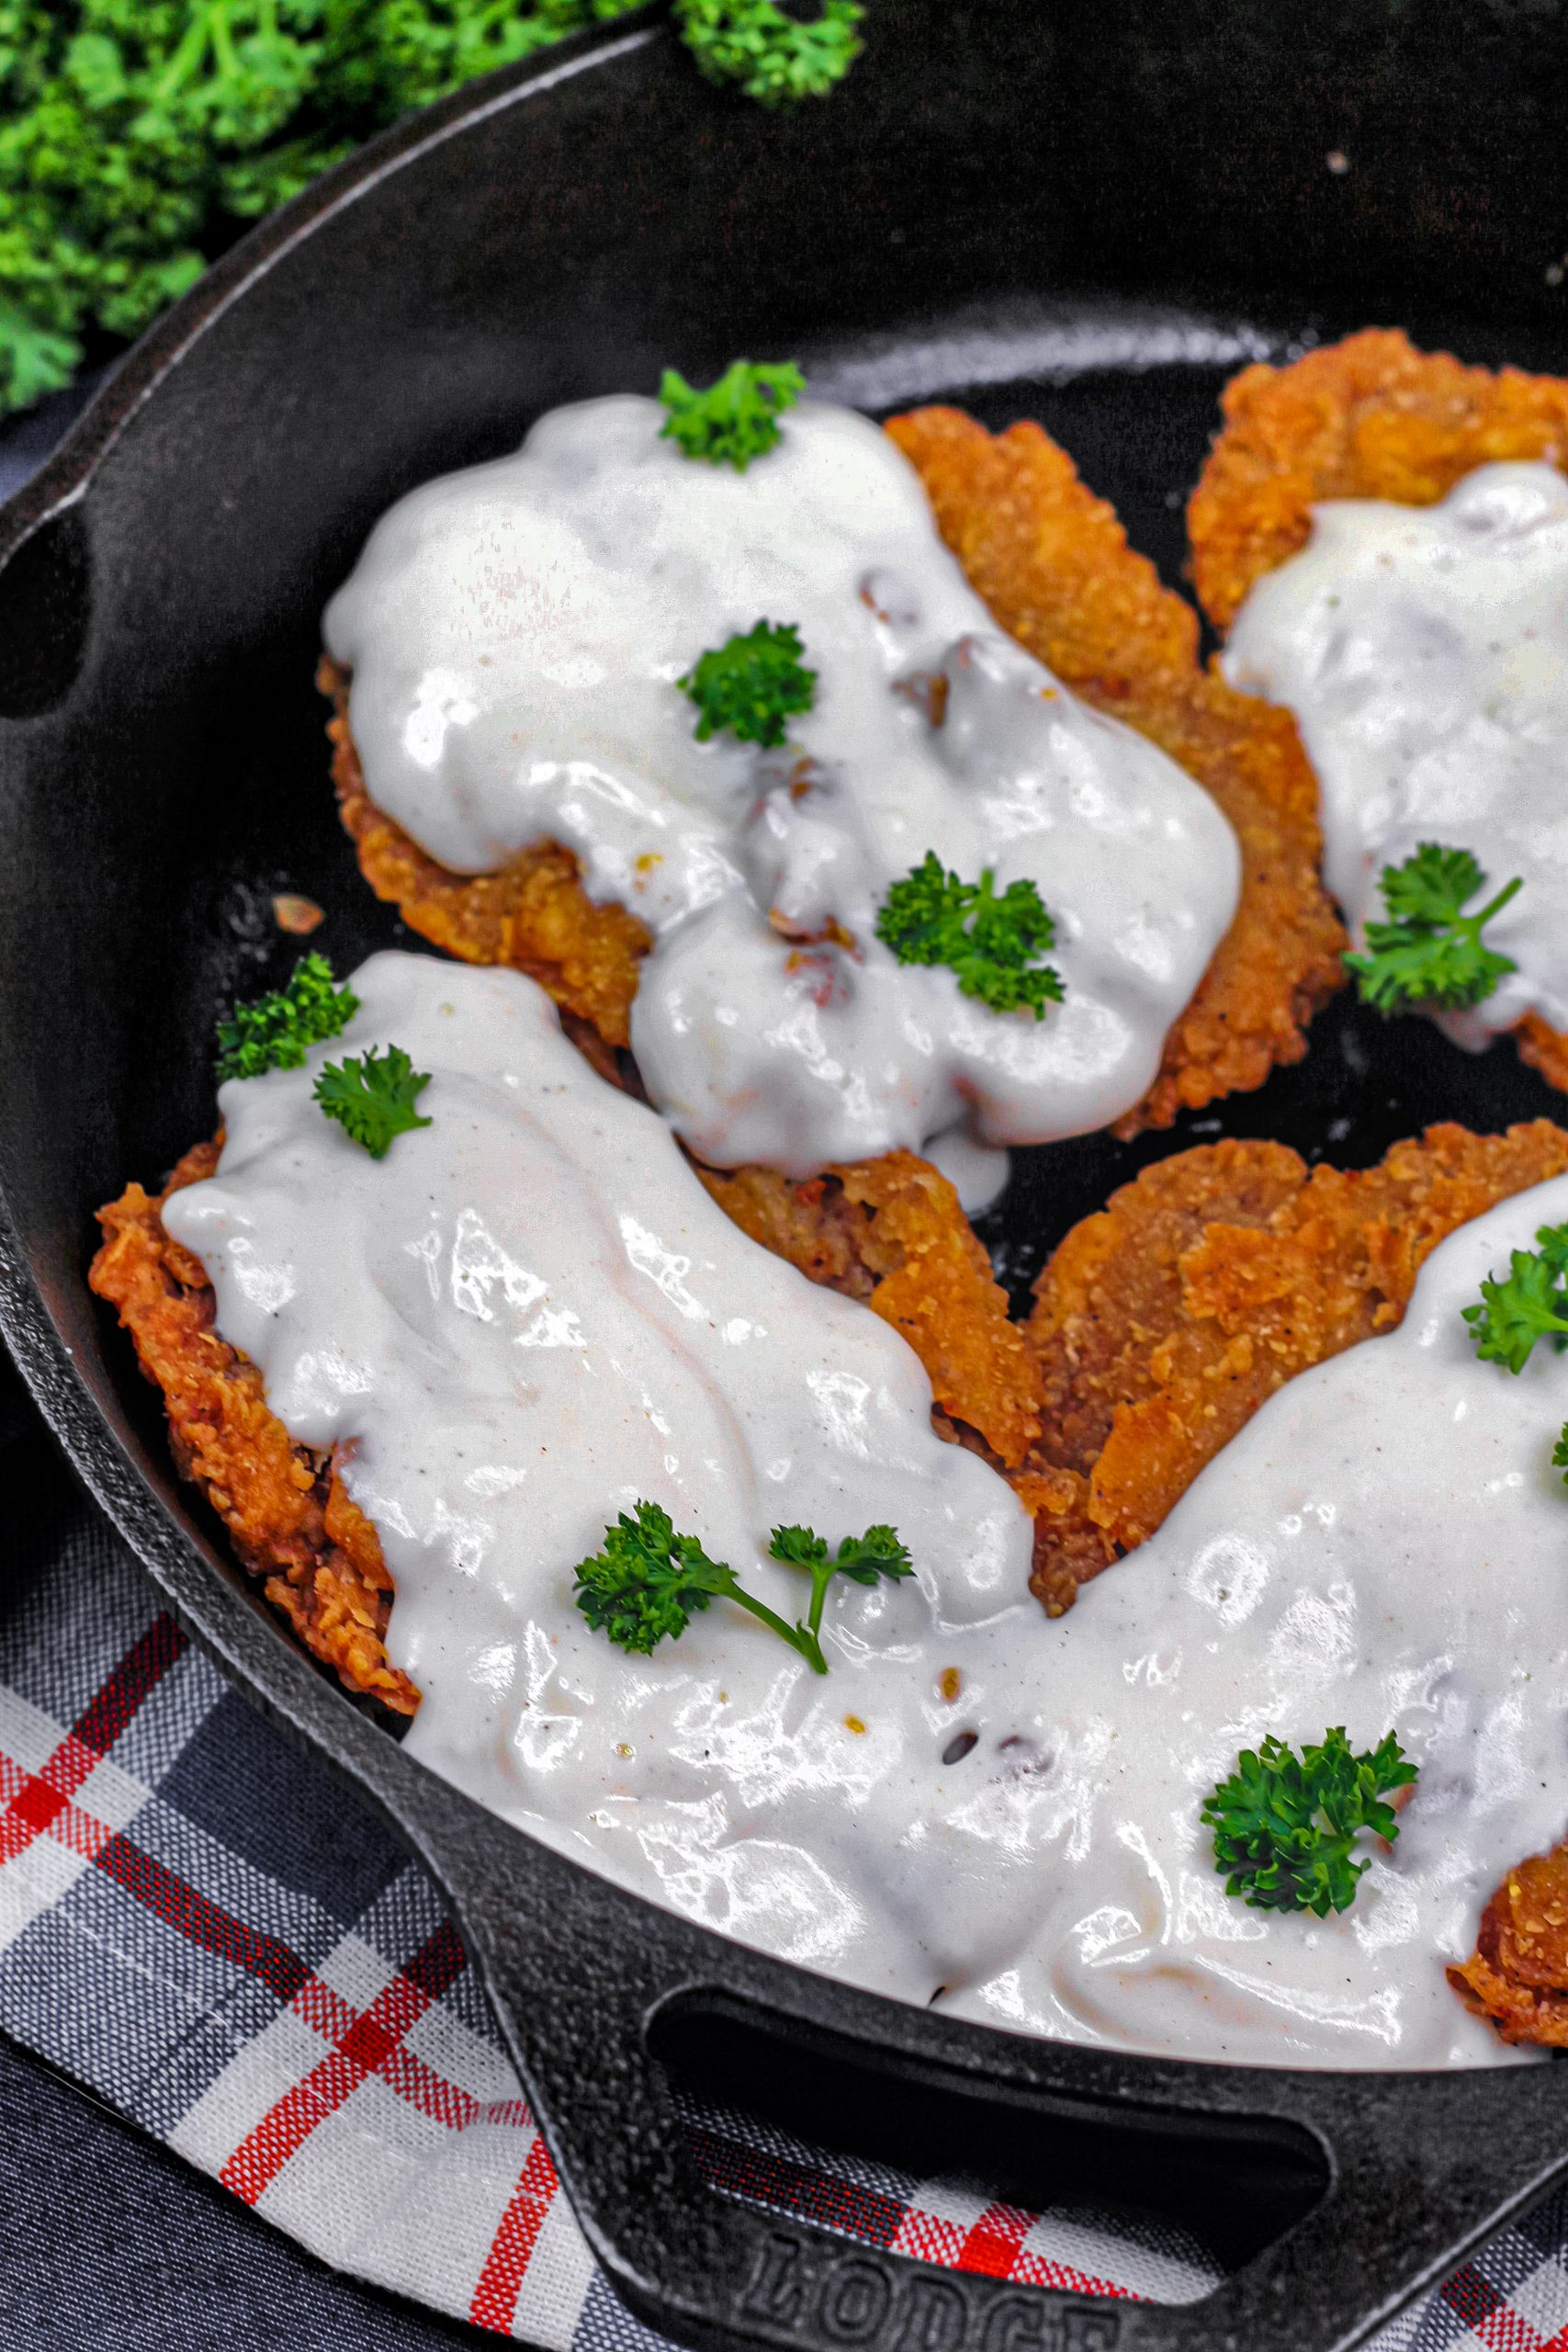 Drizzle gravy on top of the fried steak and serve with mashed potatoes.